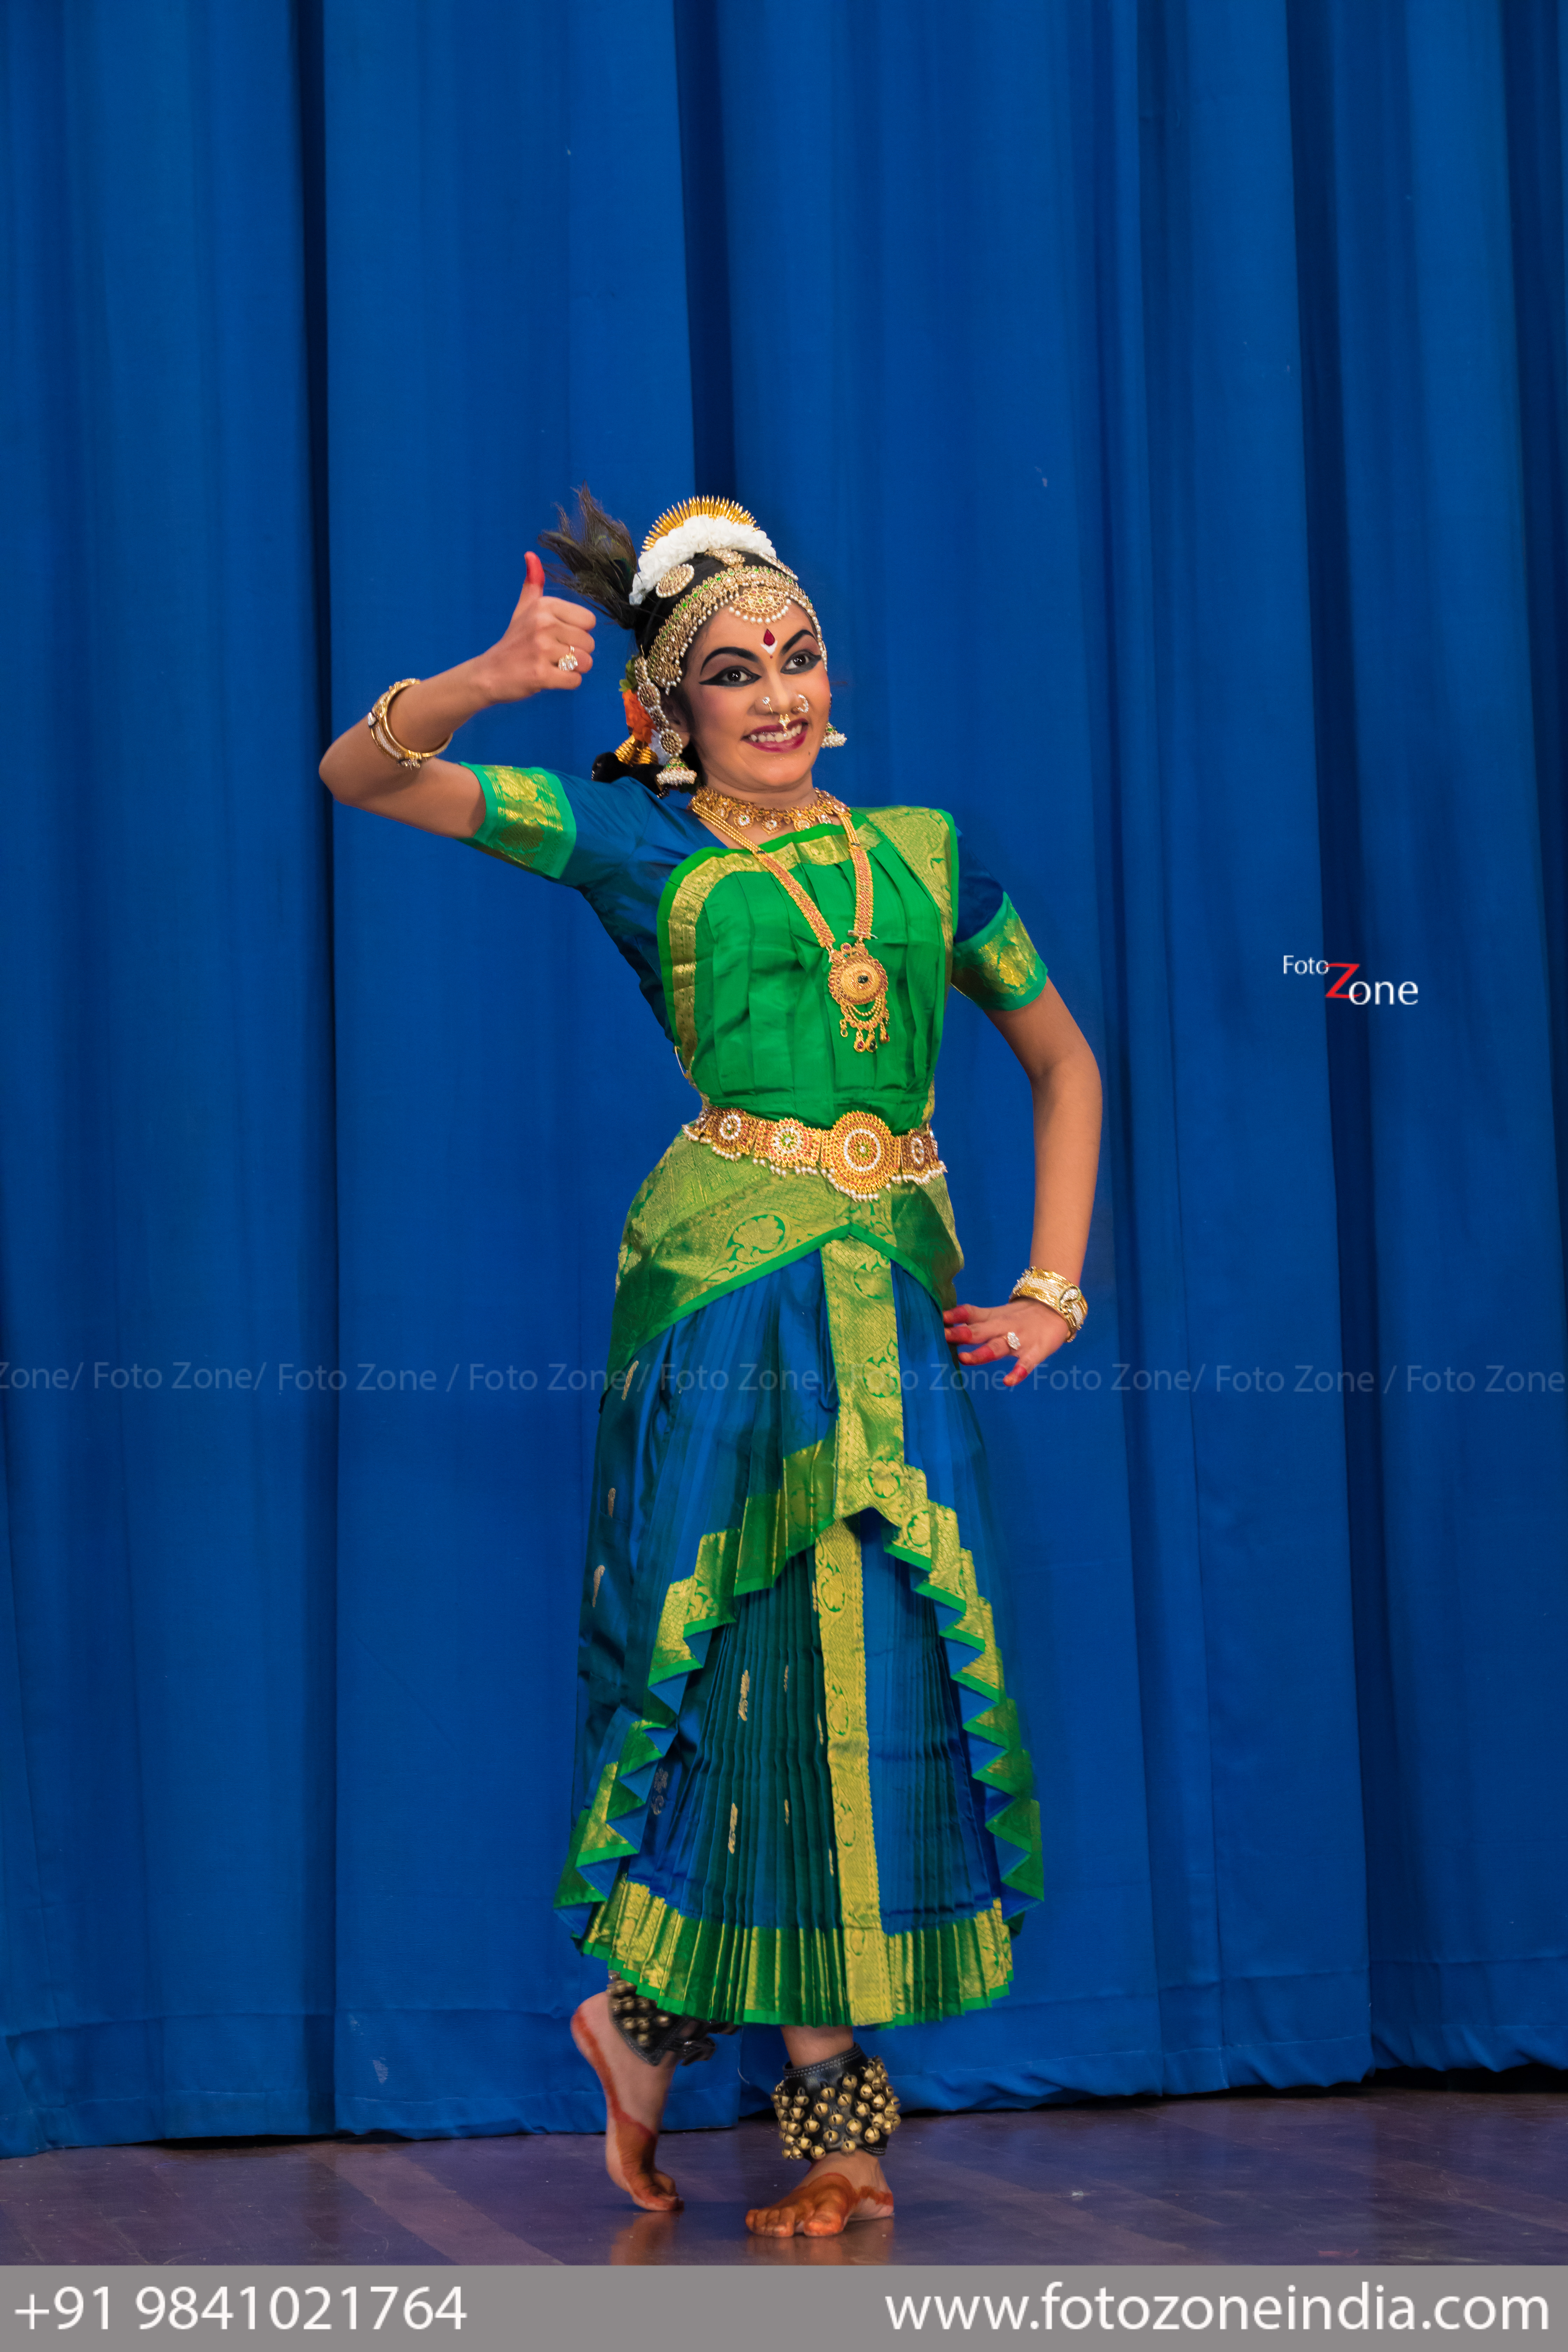 Thiraseela.com :: An Online Media for Performing Arts | Bharatanatyam  poses, Indian classical dance, Indian classical dancer